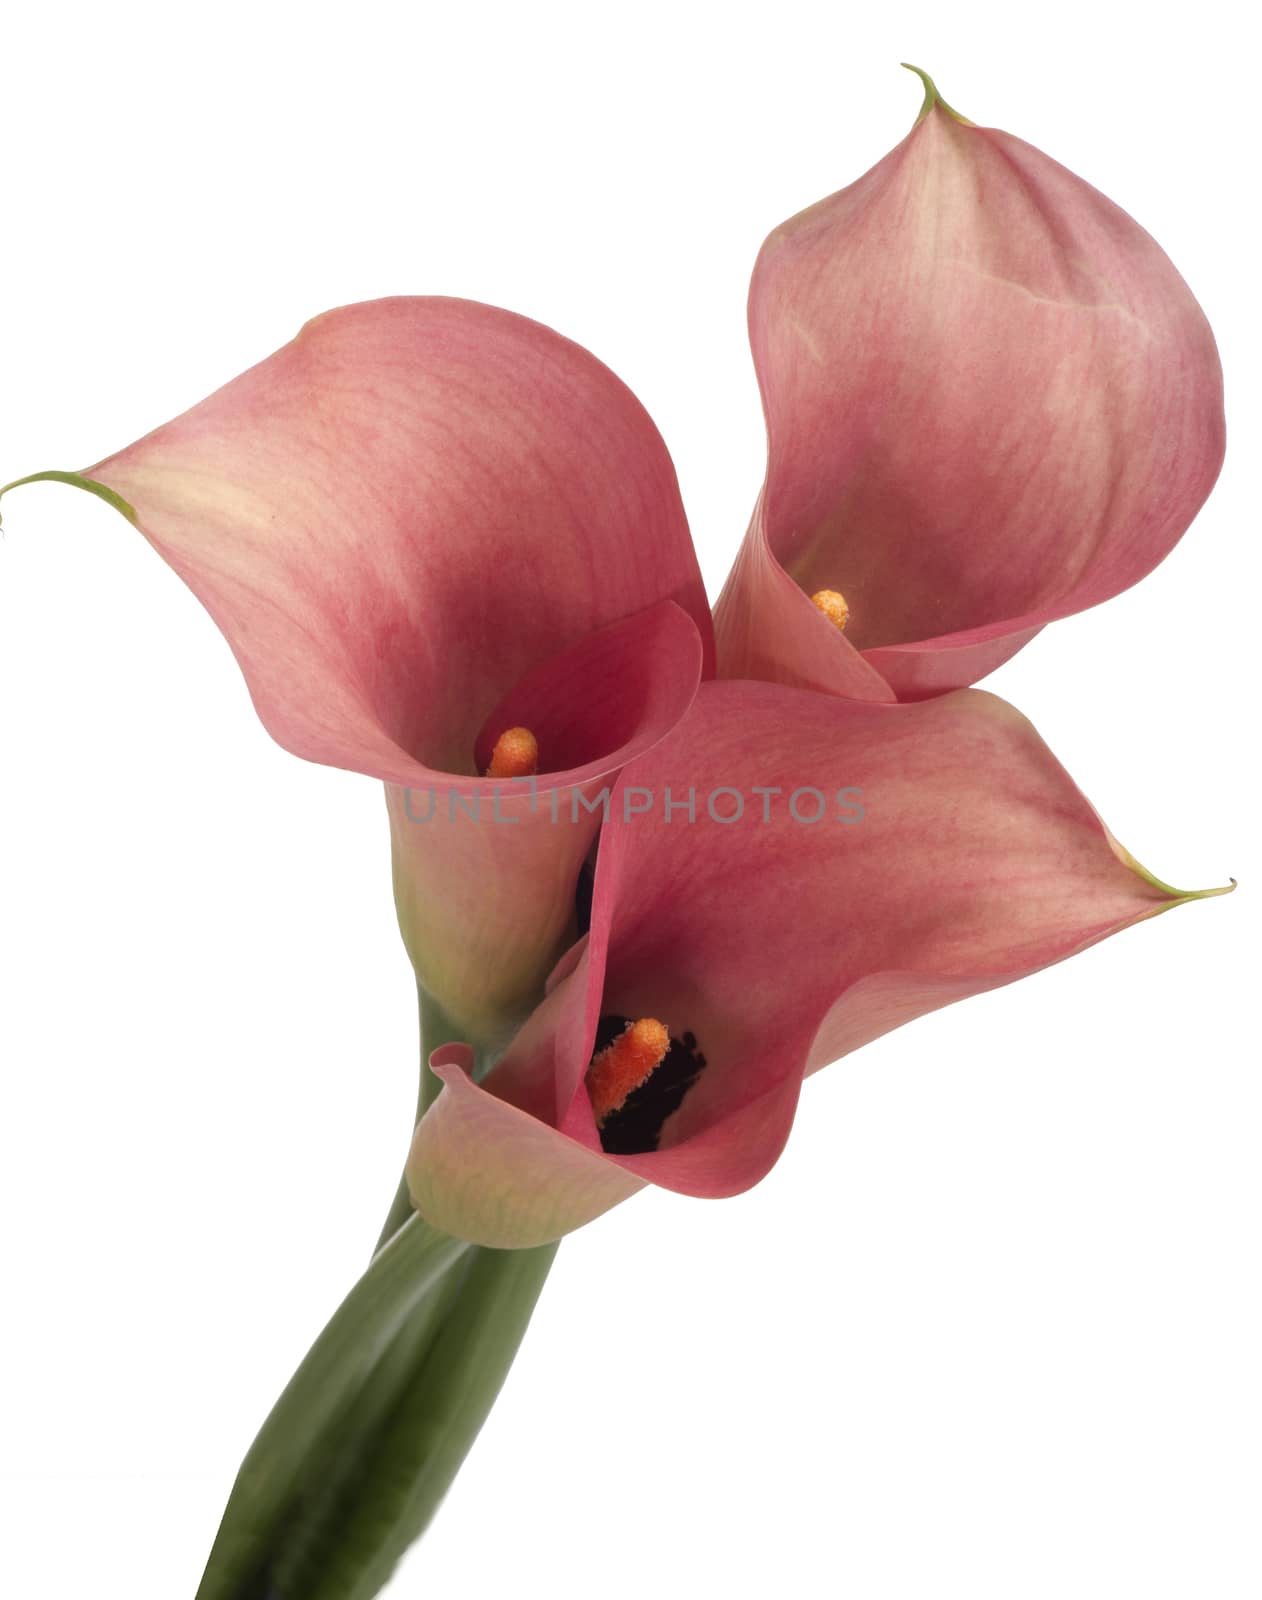 Calla lilies by Photobess58